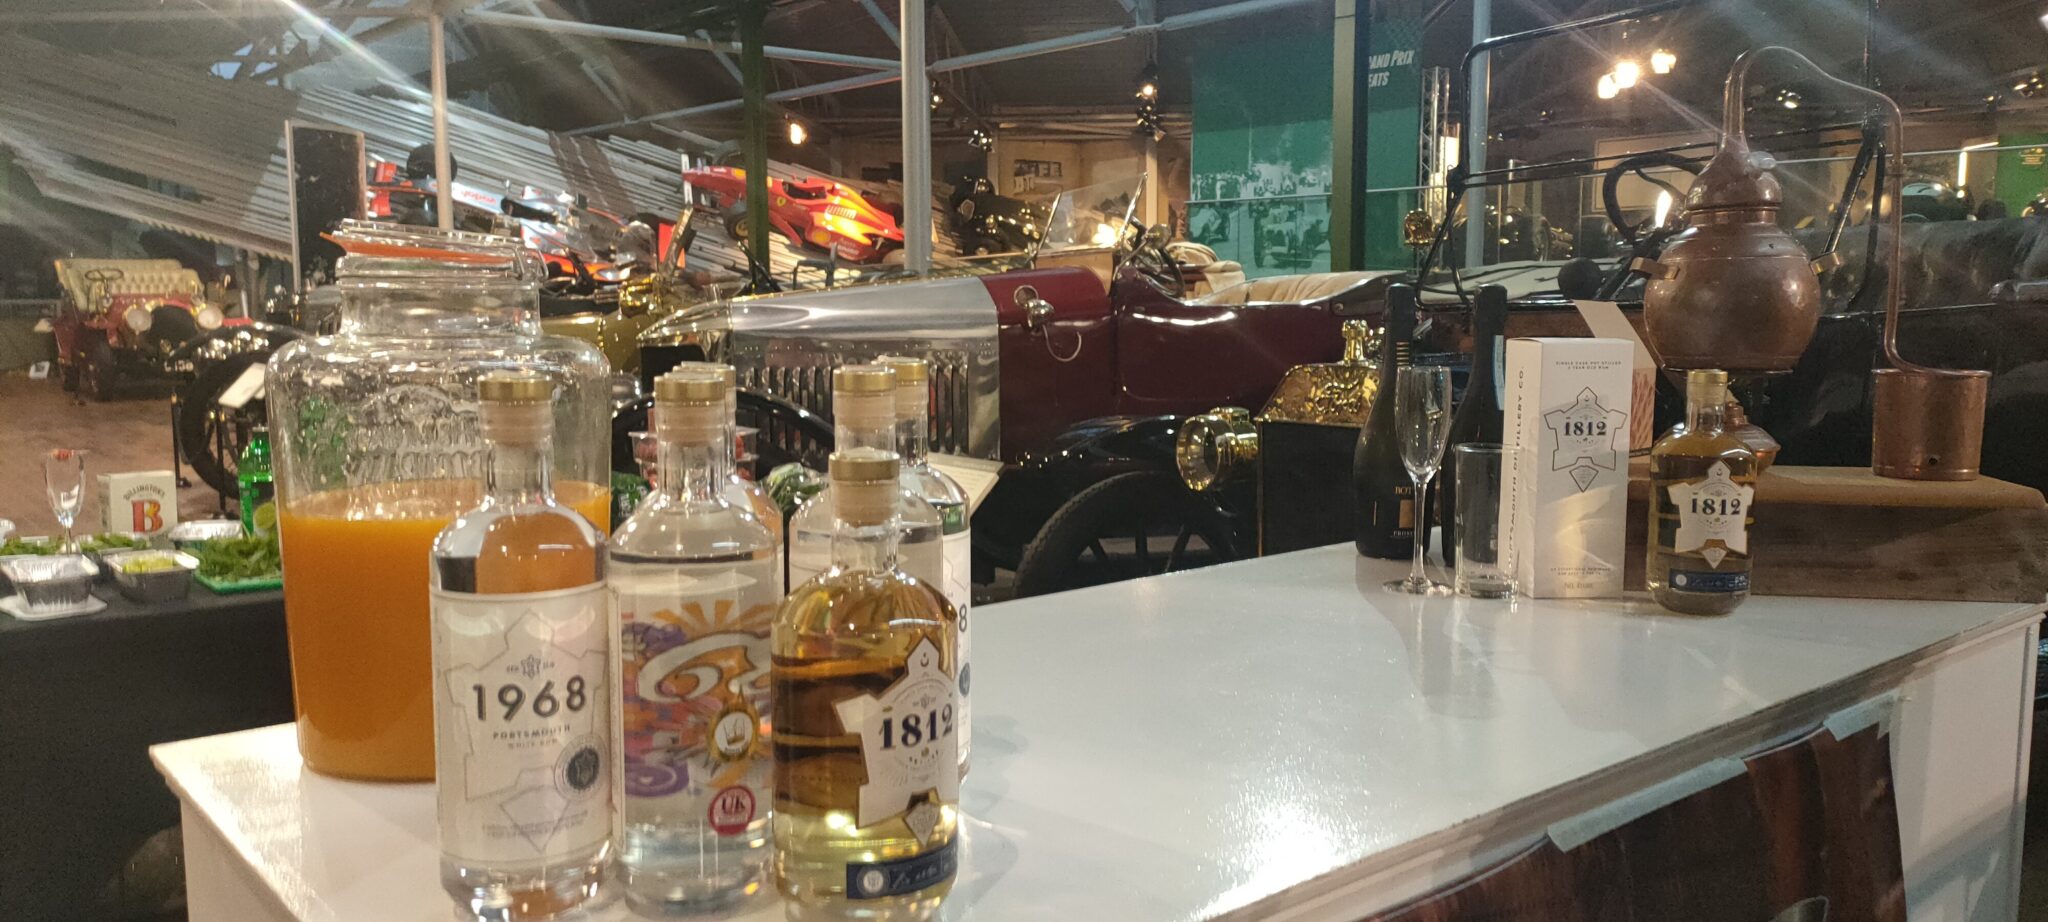 Selection of alcohol bottles on a bar with car in the background